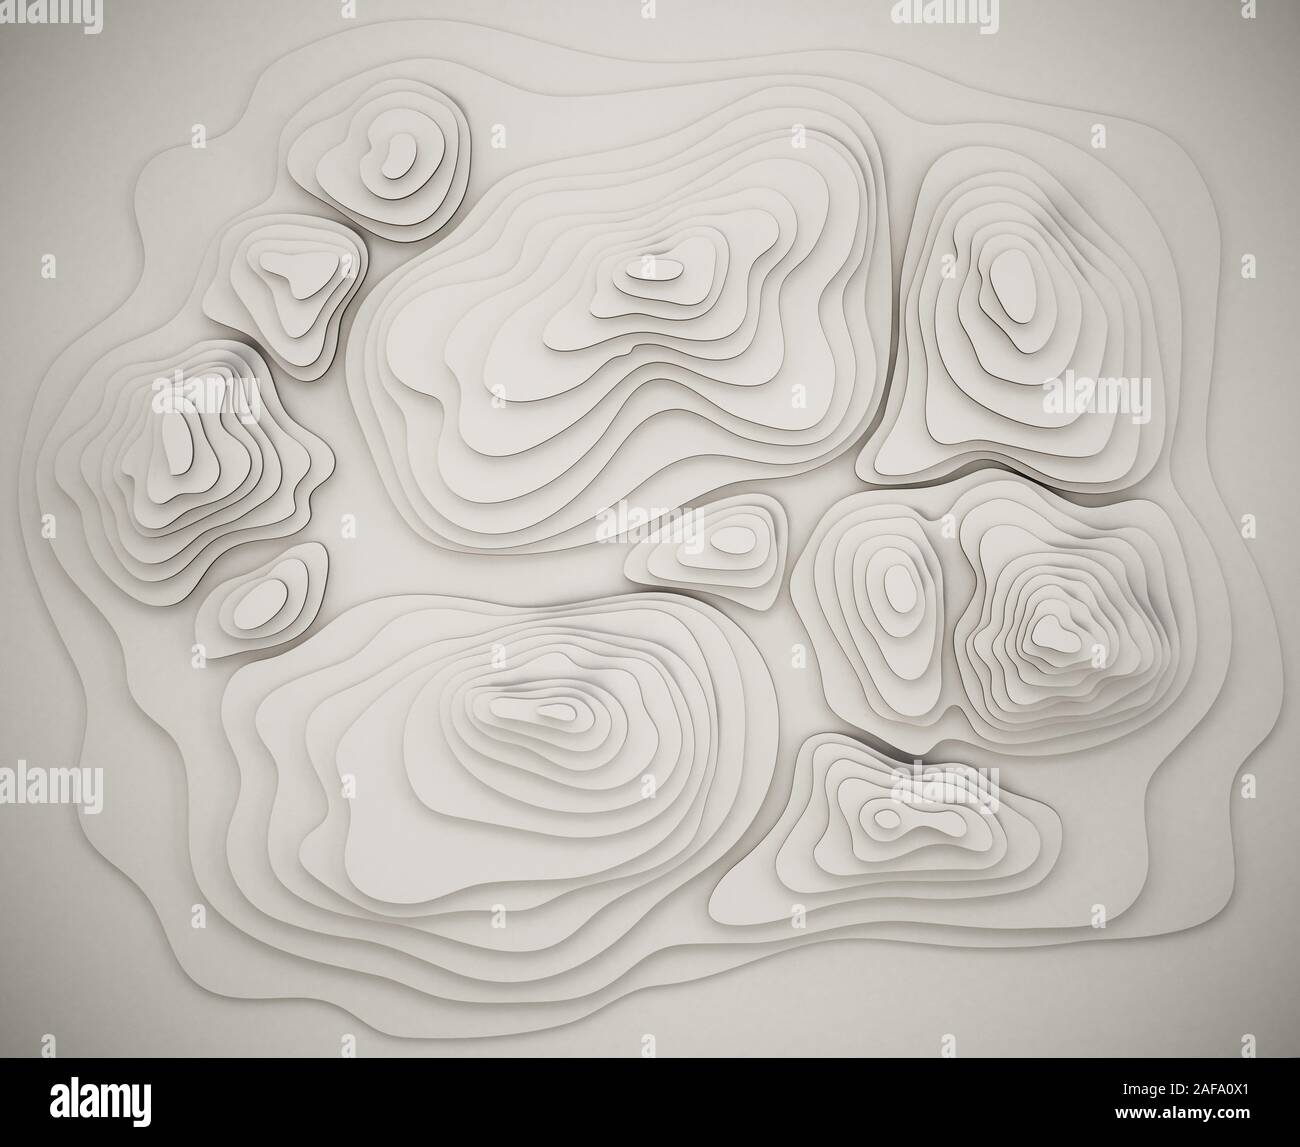 Topography map showing valleys and mountains. 3D illustration. Stock Photo